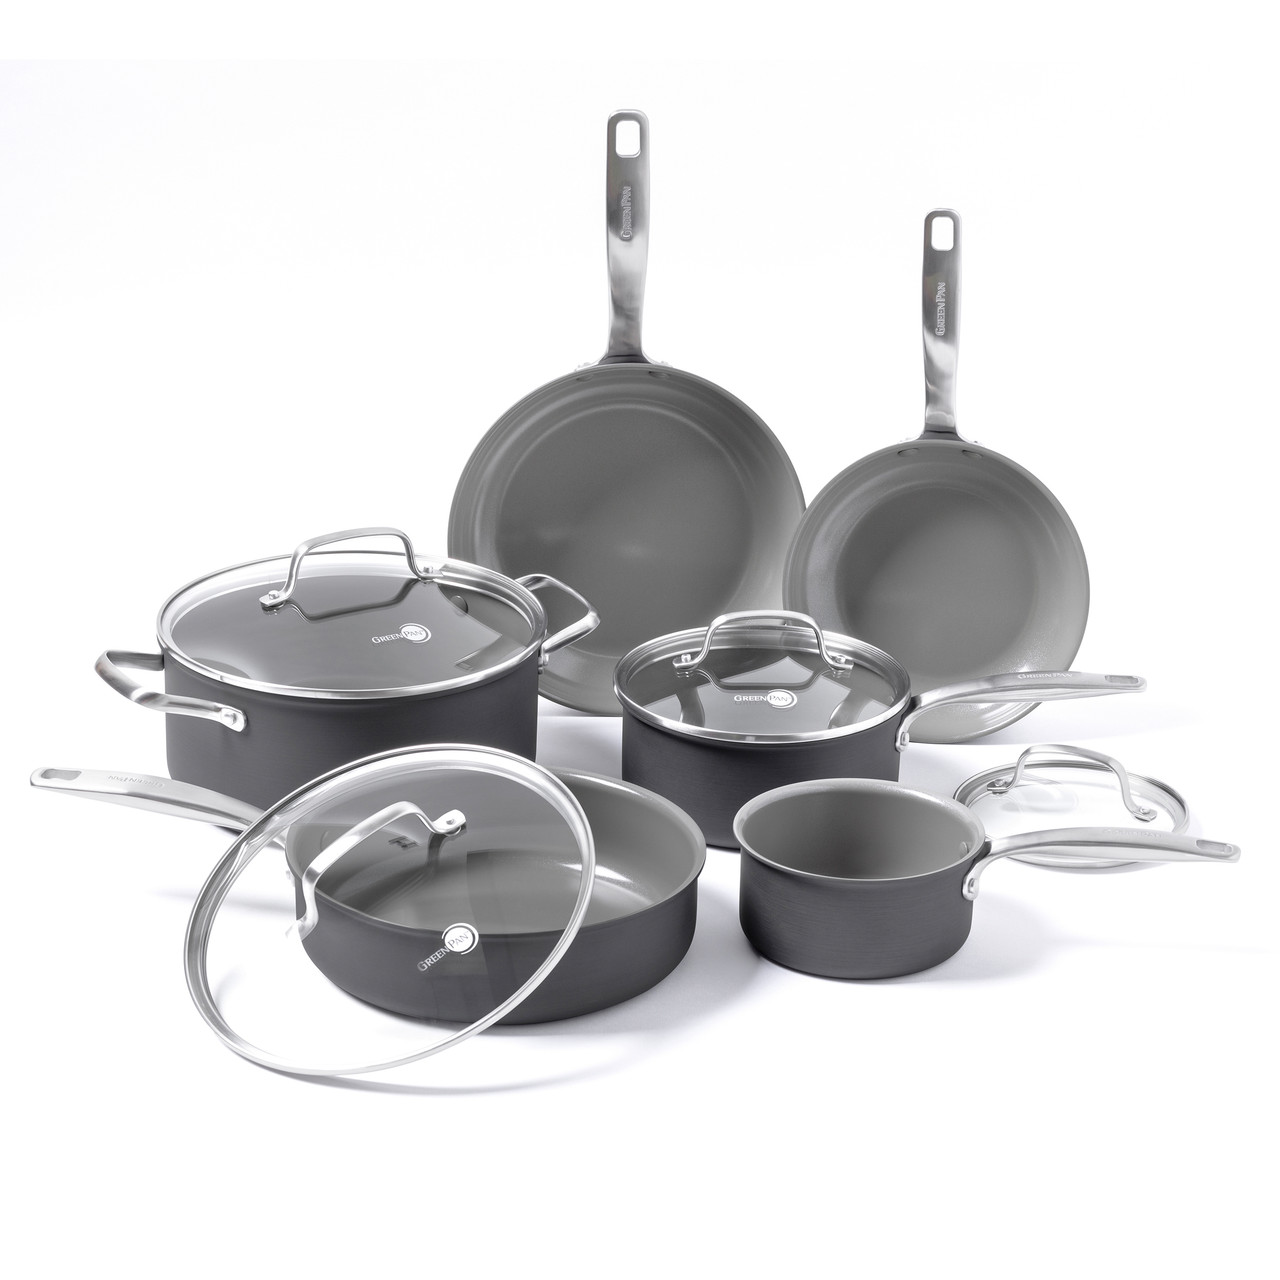 Six ceramic pots and pans with class lids